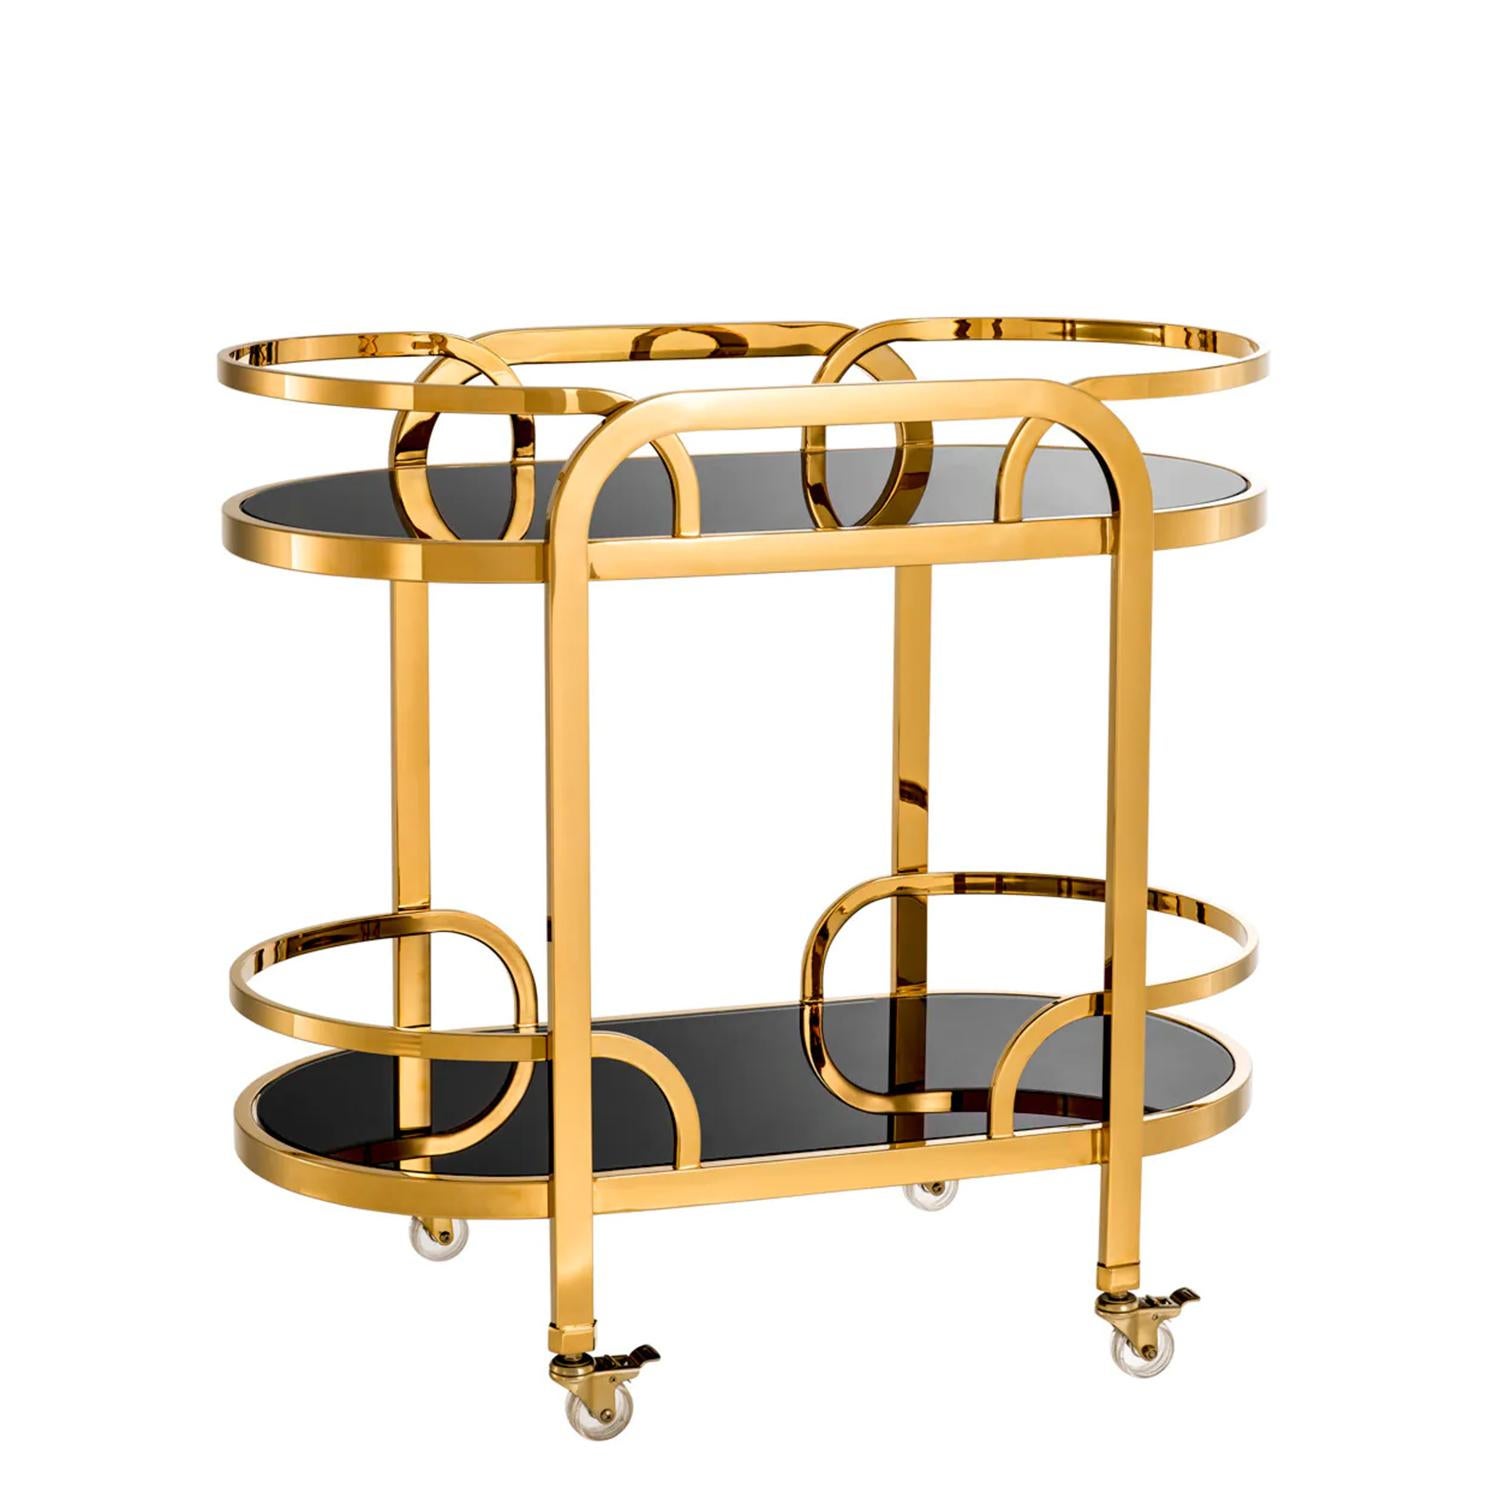 Trolley Tommy ith all structure in polished stainless
steel in gold finish. Up and down tops in smocked 
glass. With 4 clear acrylic rotative castors.